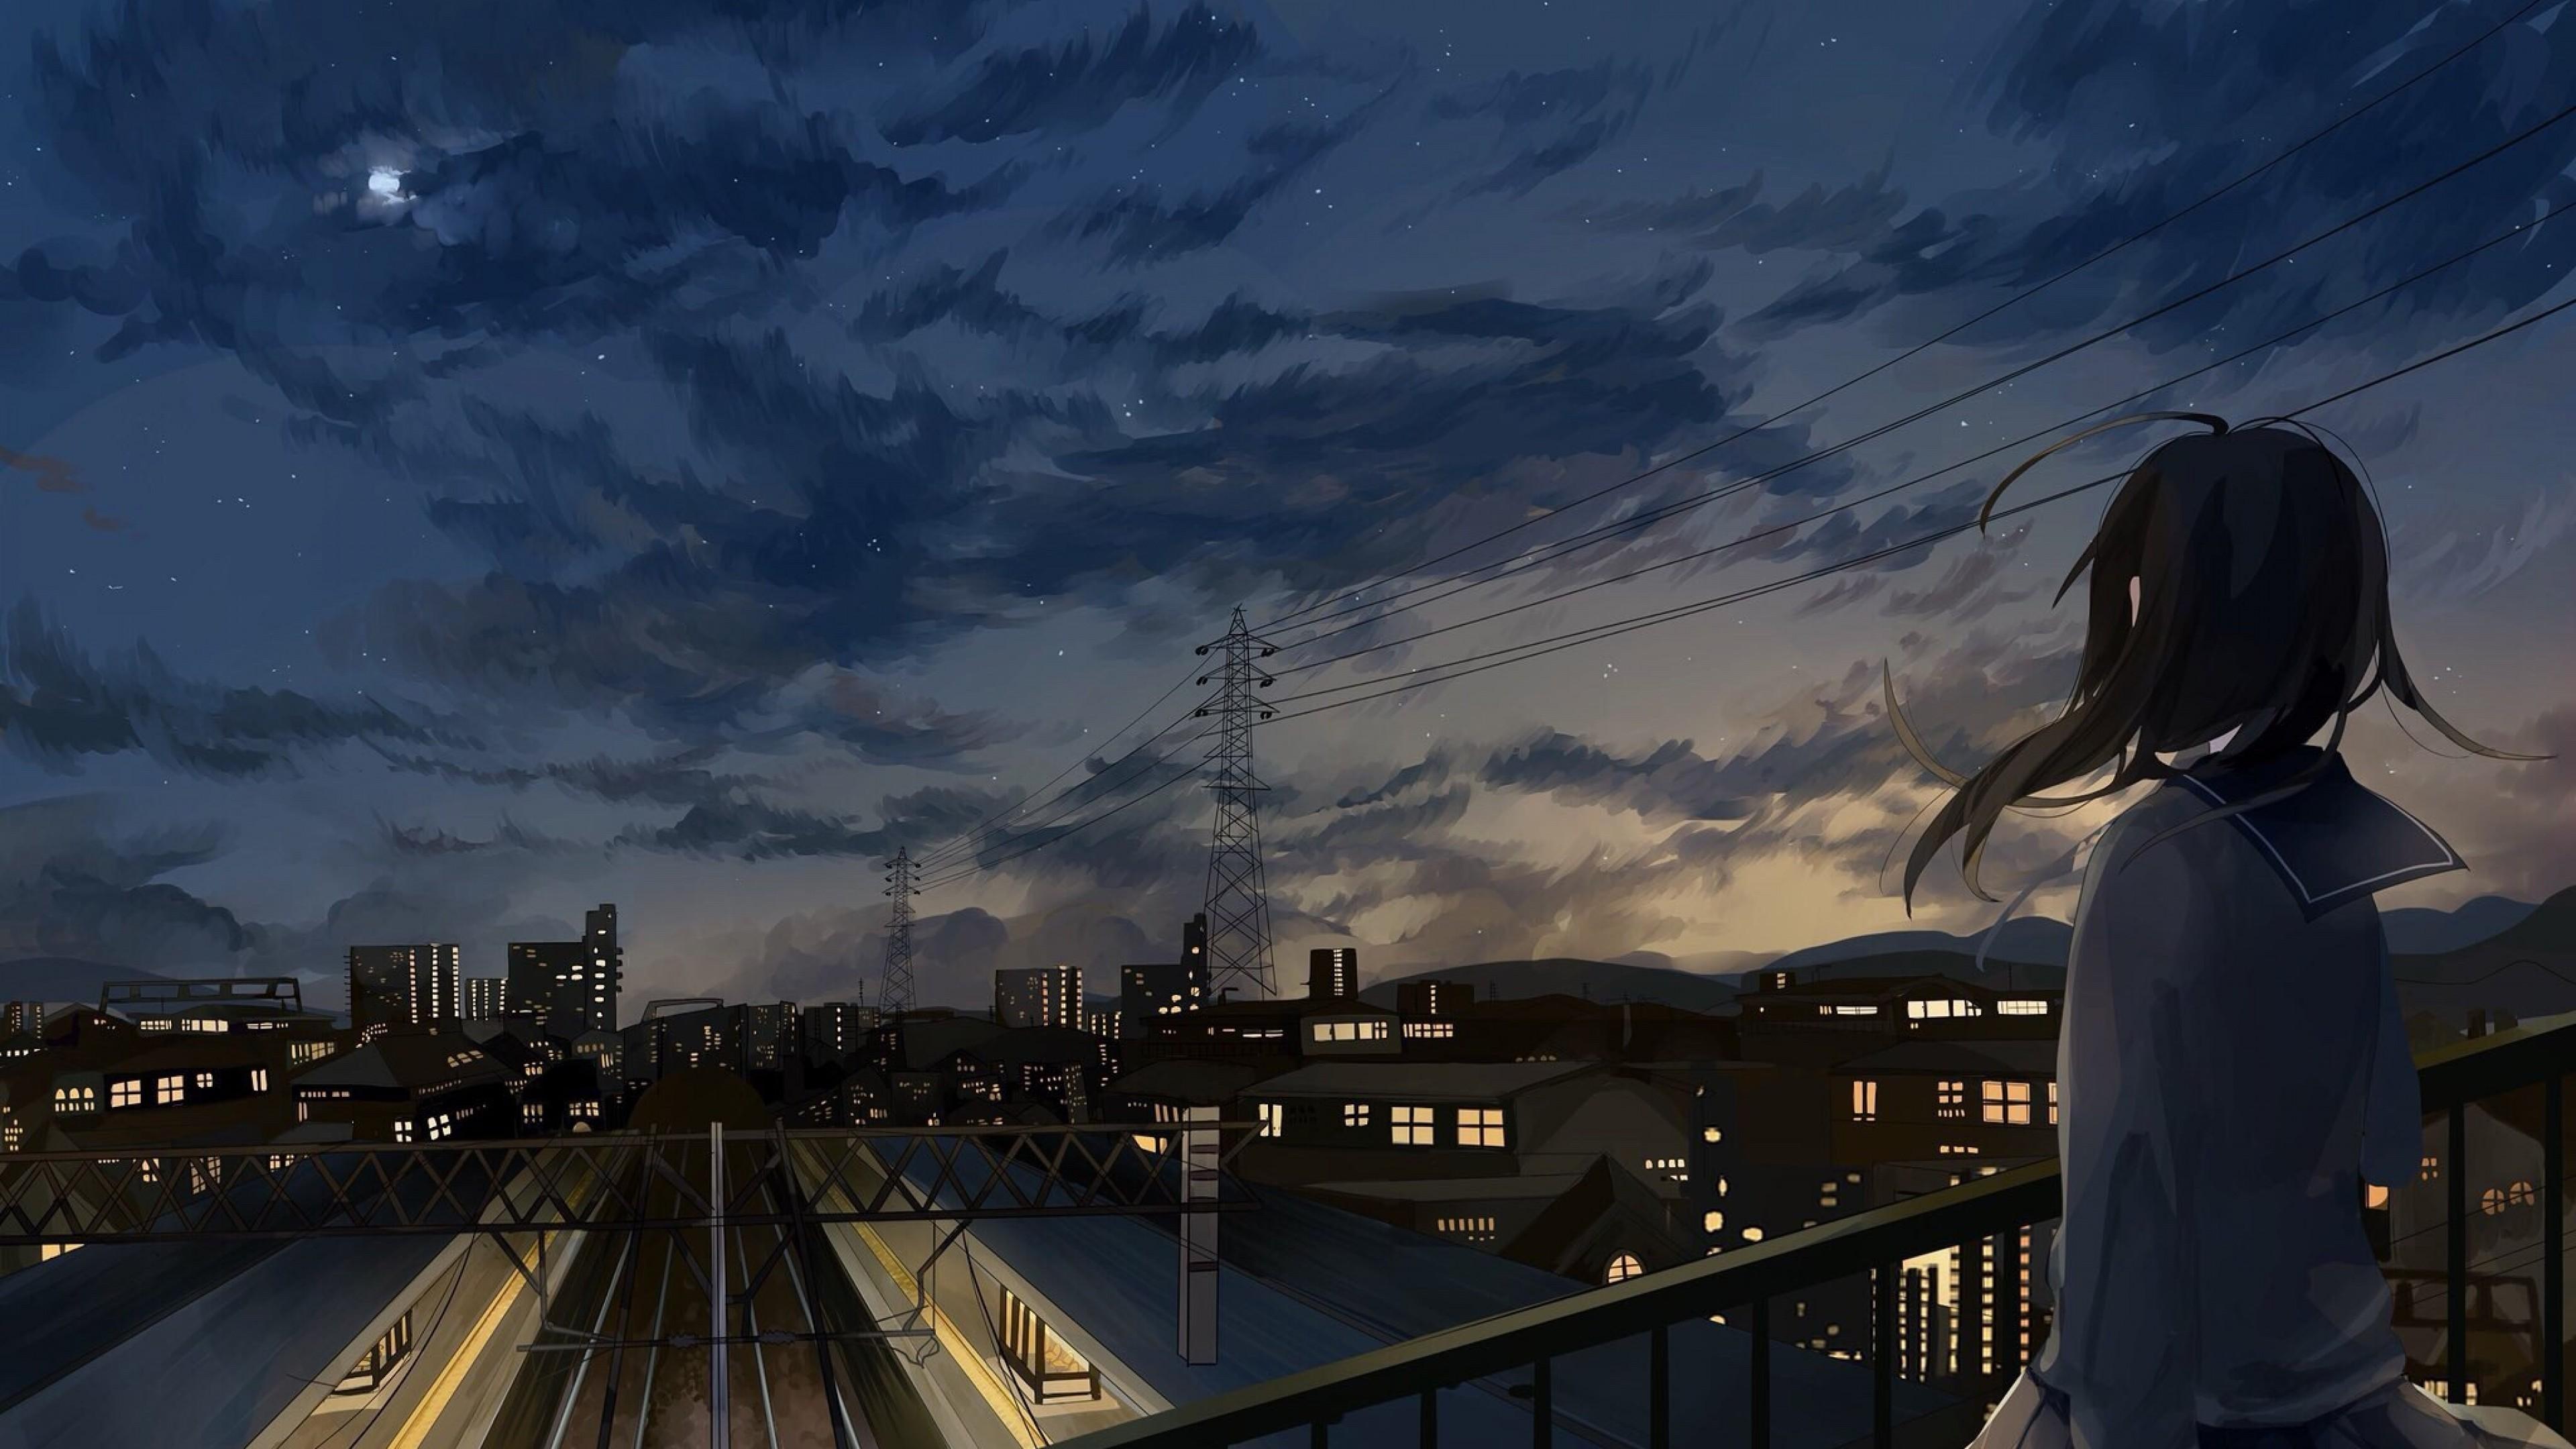 Download 3840x2160 Anime Girl, City, Night, Clouds, Back View